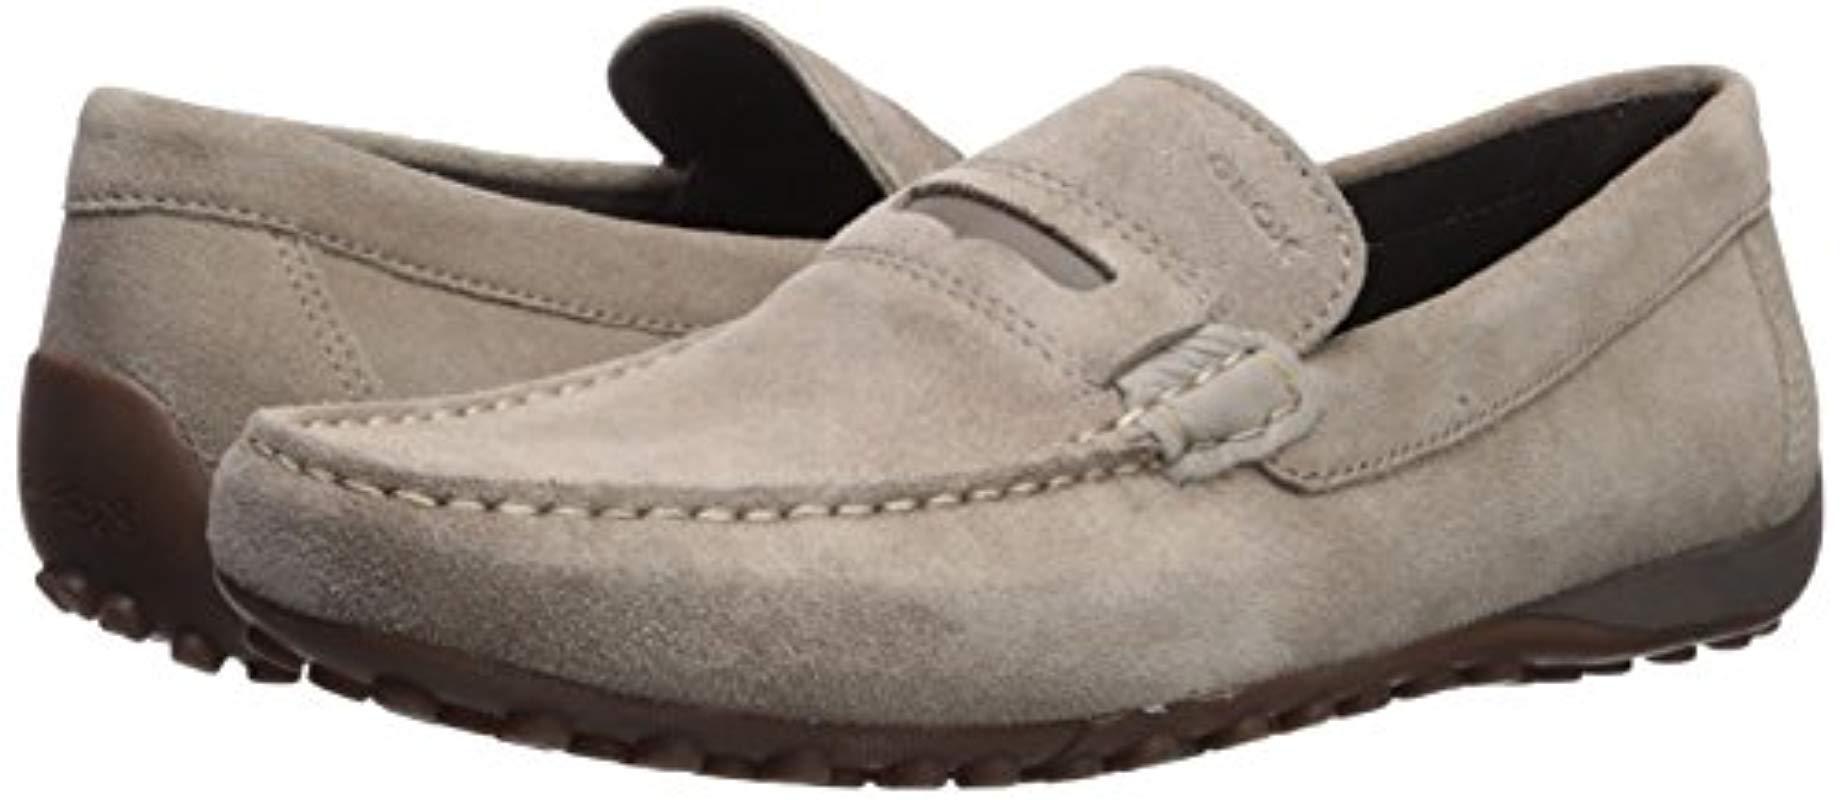 Geox Suede Snake Moc 20 Moccasin in Taupe (Natural) for Men - Lyst